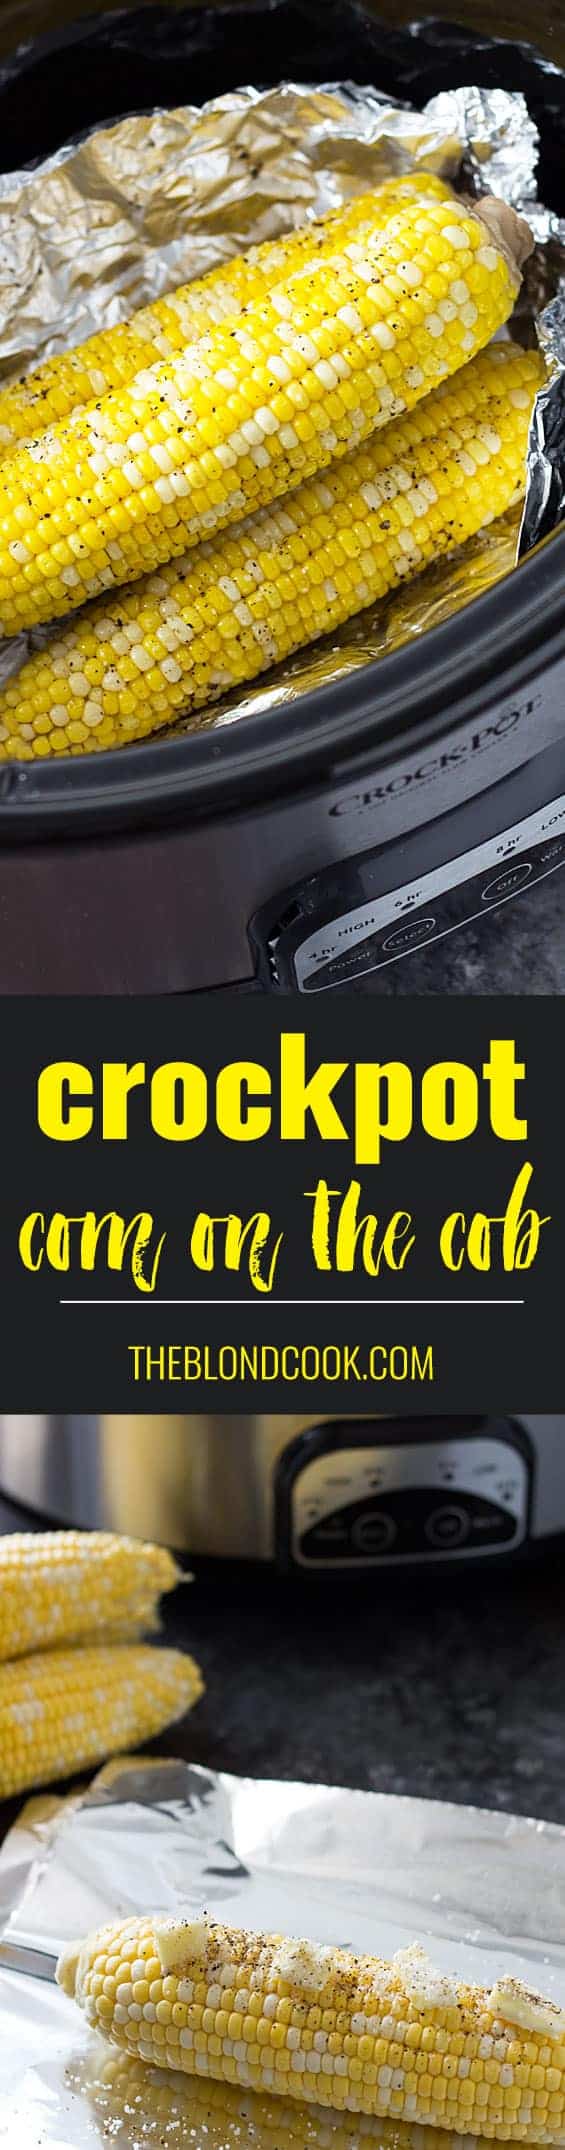 Two images of corn on the cob.  Text in center says crockpot corn on the cob.